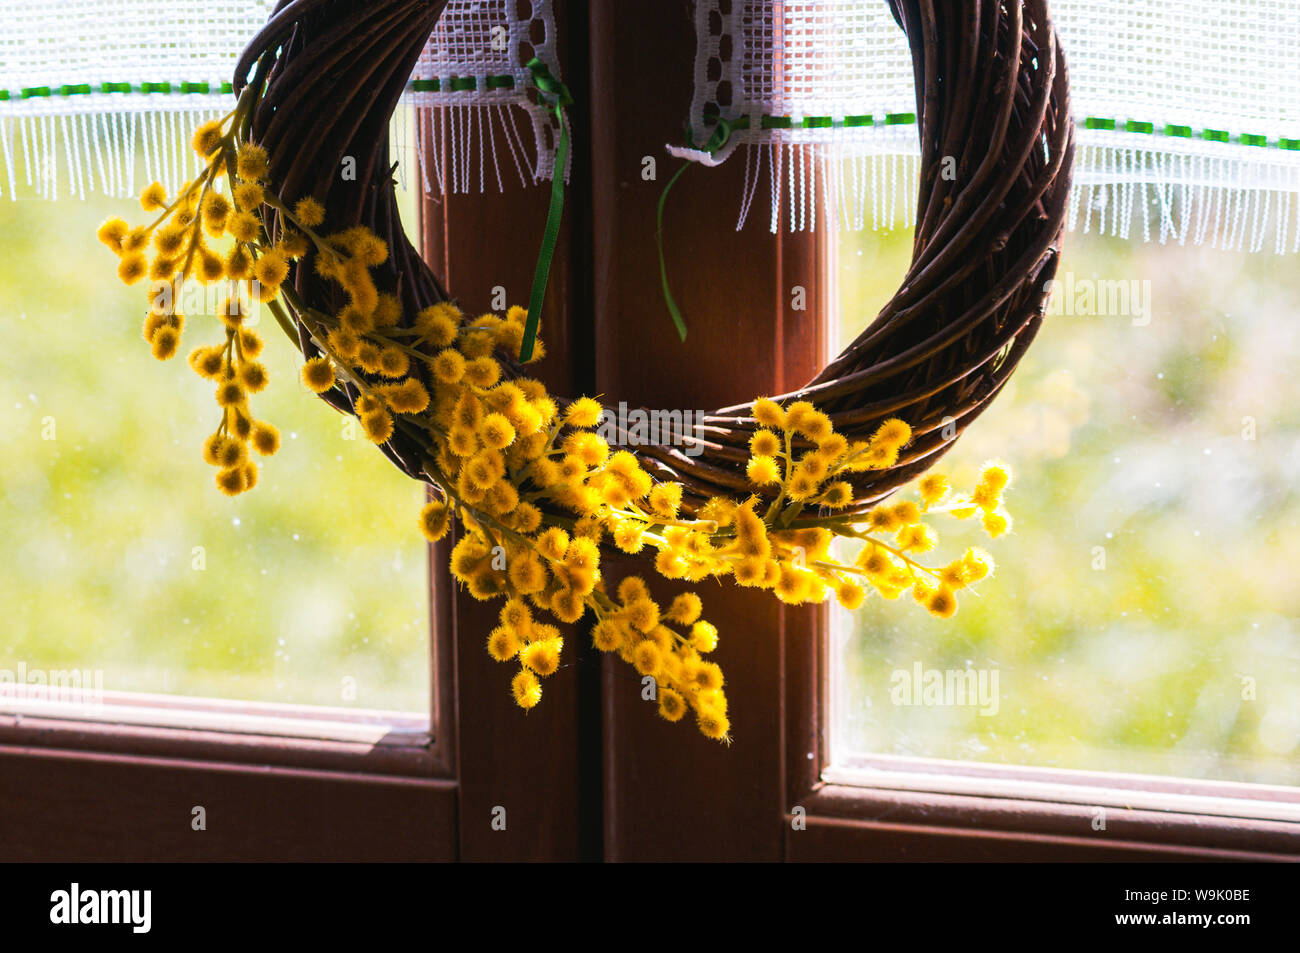 A spring / easter decorative wreath made from pussy willow and decorated with small yellow flowers. Stock Photo